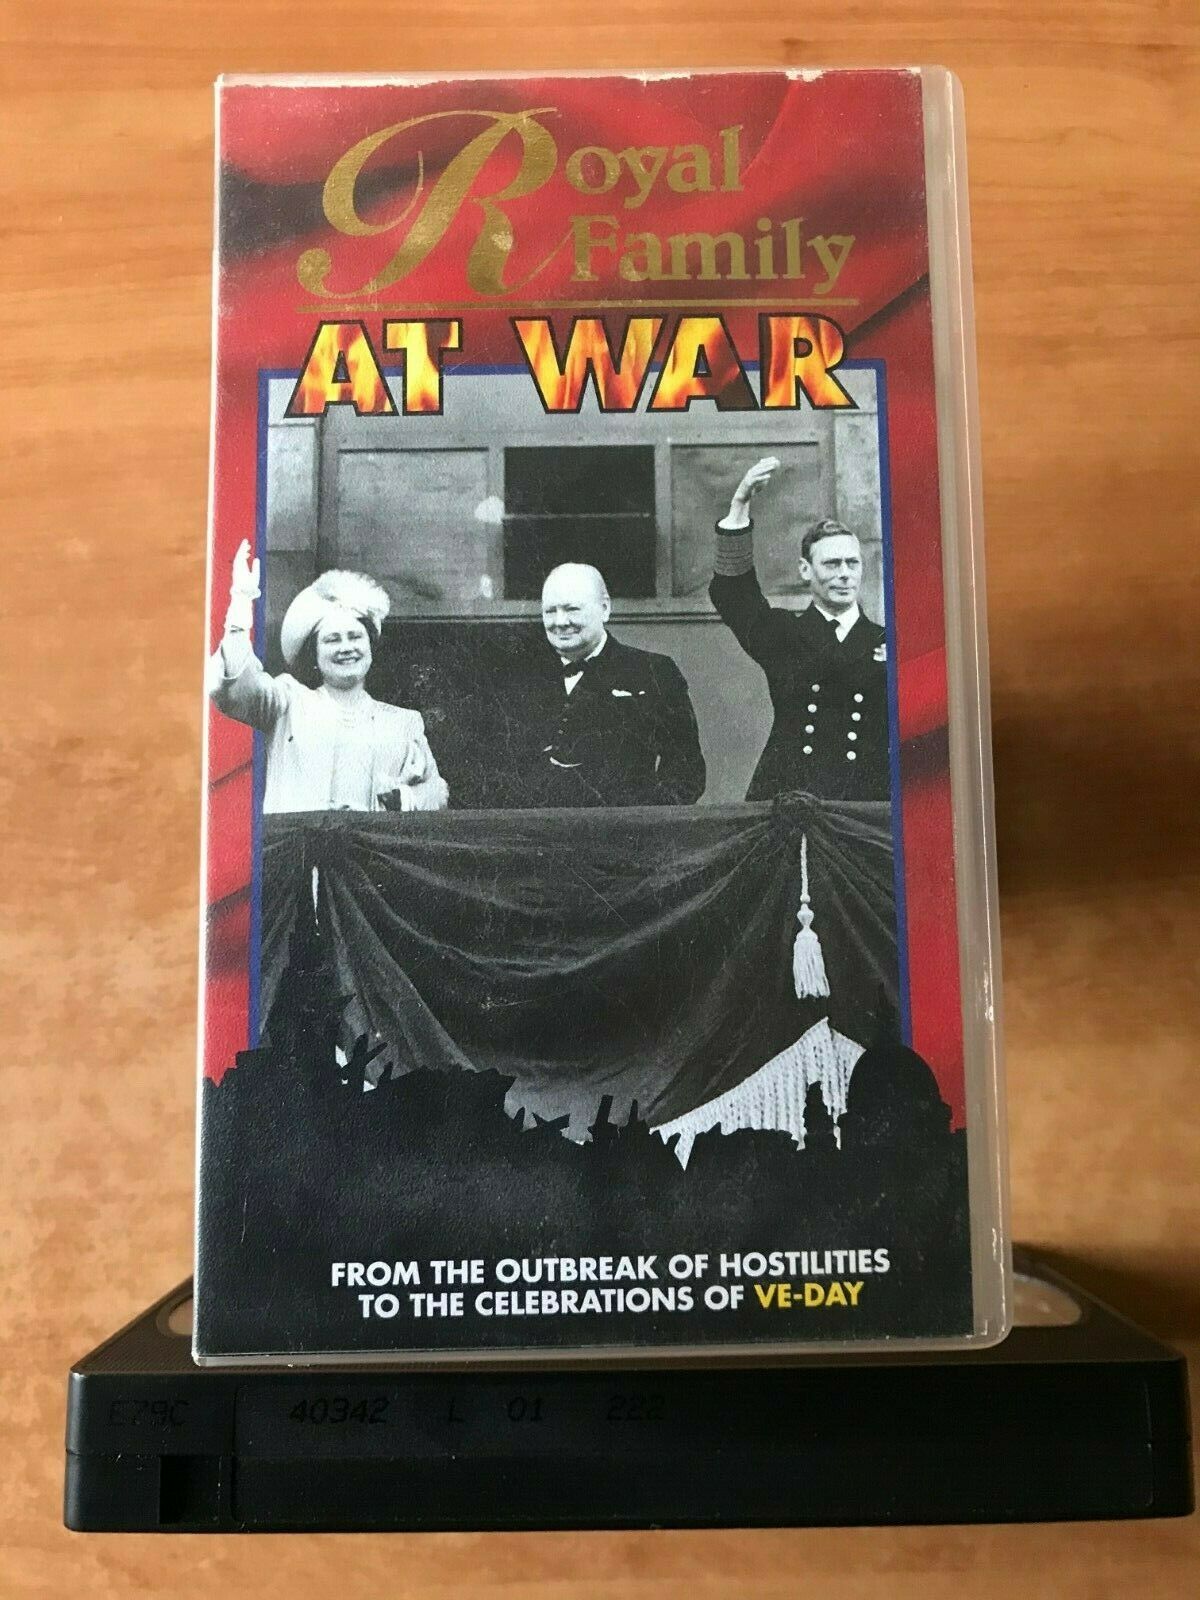 Royal Family At War [Documentary]: War World 2 - Ve-Day - Peter Townsend - VHS-